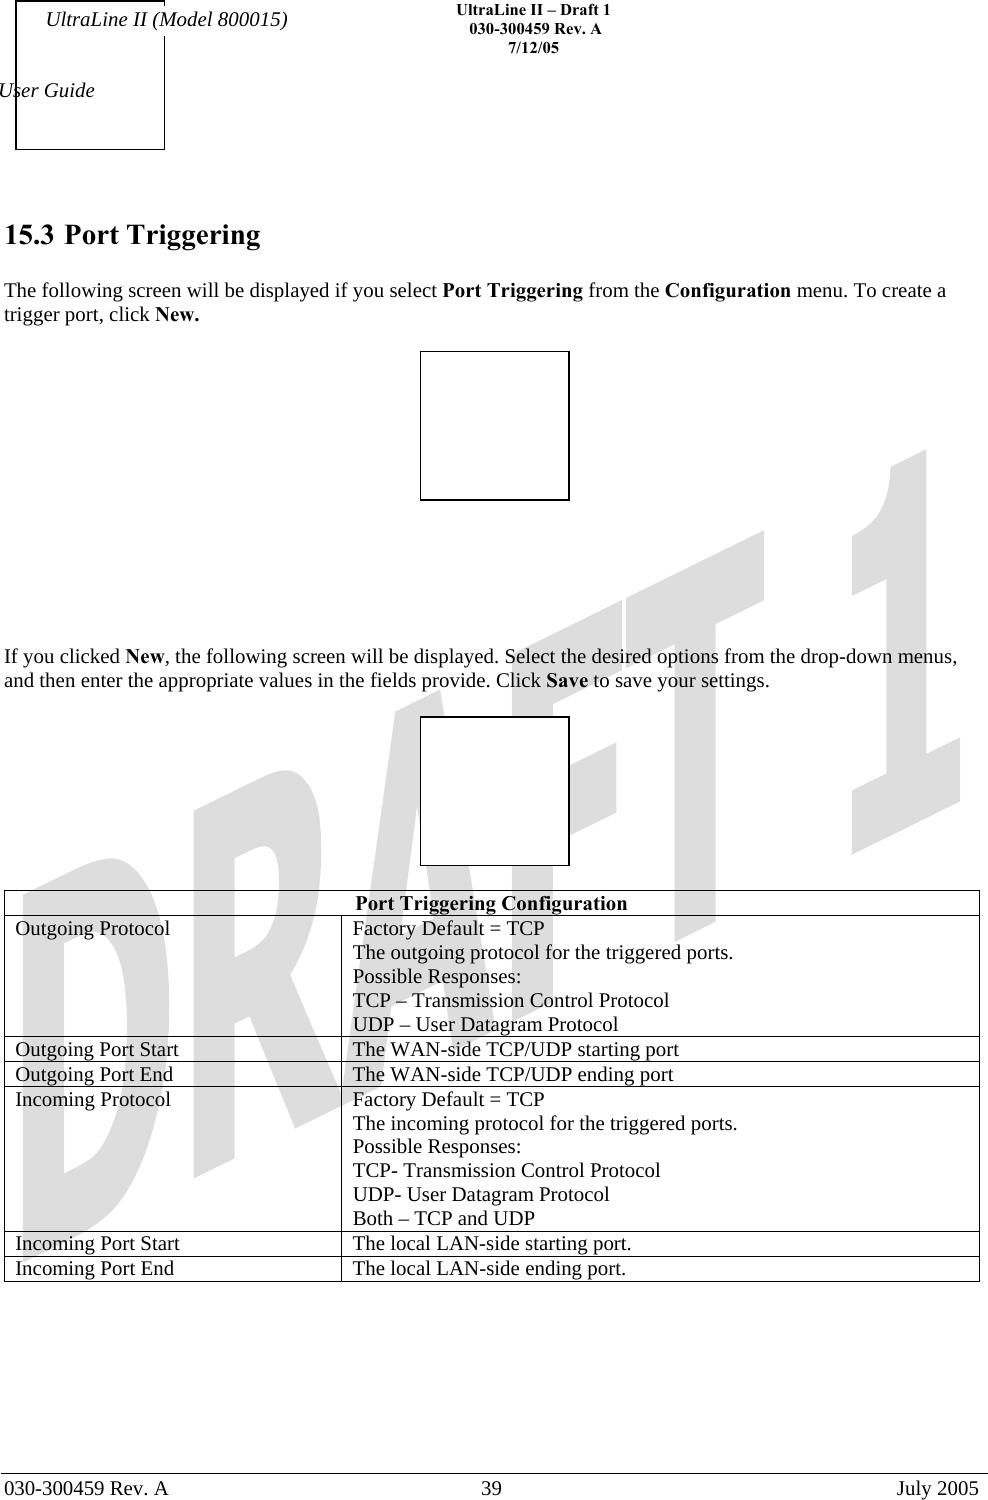    UltraLine II – Draft 1   030-300459 Rev. A 7/12/05   030-300459 Rev. A  39  July 2005  User Guide UltraLine II (Model 800015) 15.3 Port Triggering  The following screen will be displayed if you select Port Triggering from the Configuration menu. To create a trigger port, click New.         If you clicked New, the following screen will be displayed. Select the desired options from the drop-down menus, and then enter the appropriate values in the fields provide. Click Save to save your settings.    Port Triggering Configuration Outgoing Protocol  Factory Default = TCP The outgoing protocol for the triggered ports. Possible Responses: TCP – Transmission Control Protocol UDP – User Datagram Protocol Outgoing Port Start  The WAN-side TCP/UDP starting port Outgoing Port End   The WAN-side TCP/UDP ending port Incoming Protocol  Factory Default = TCP The incoming protocol for the triggered ports. Possible Responses: TCP- Transmission Control Protocol UDP- User Datagram Protocol Both – TCP and UDP Incoming Port Start  The local LAN-side starting port. Incoming Port End  The local LAN-side ending port.       